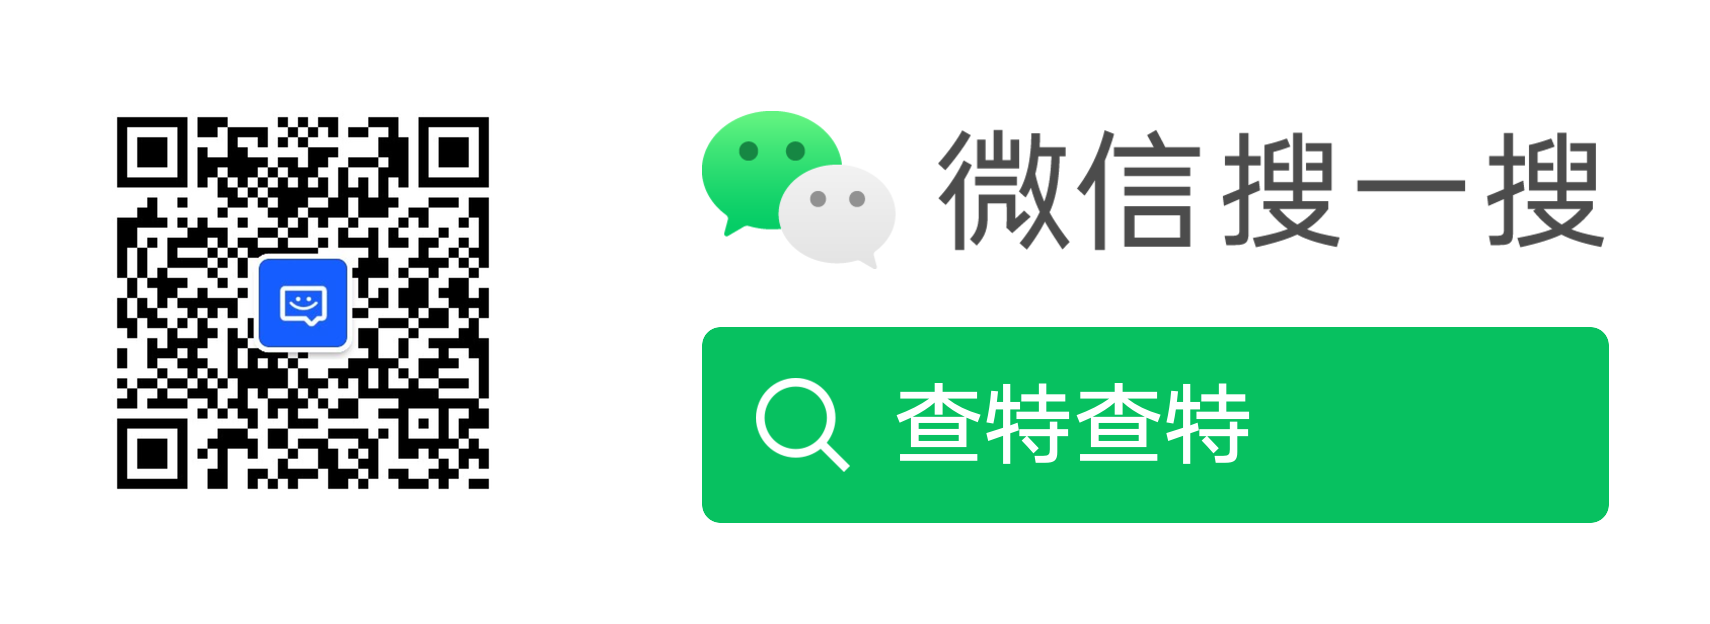 official_wechat_mp_account.png